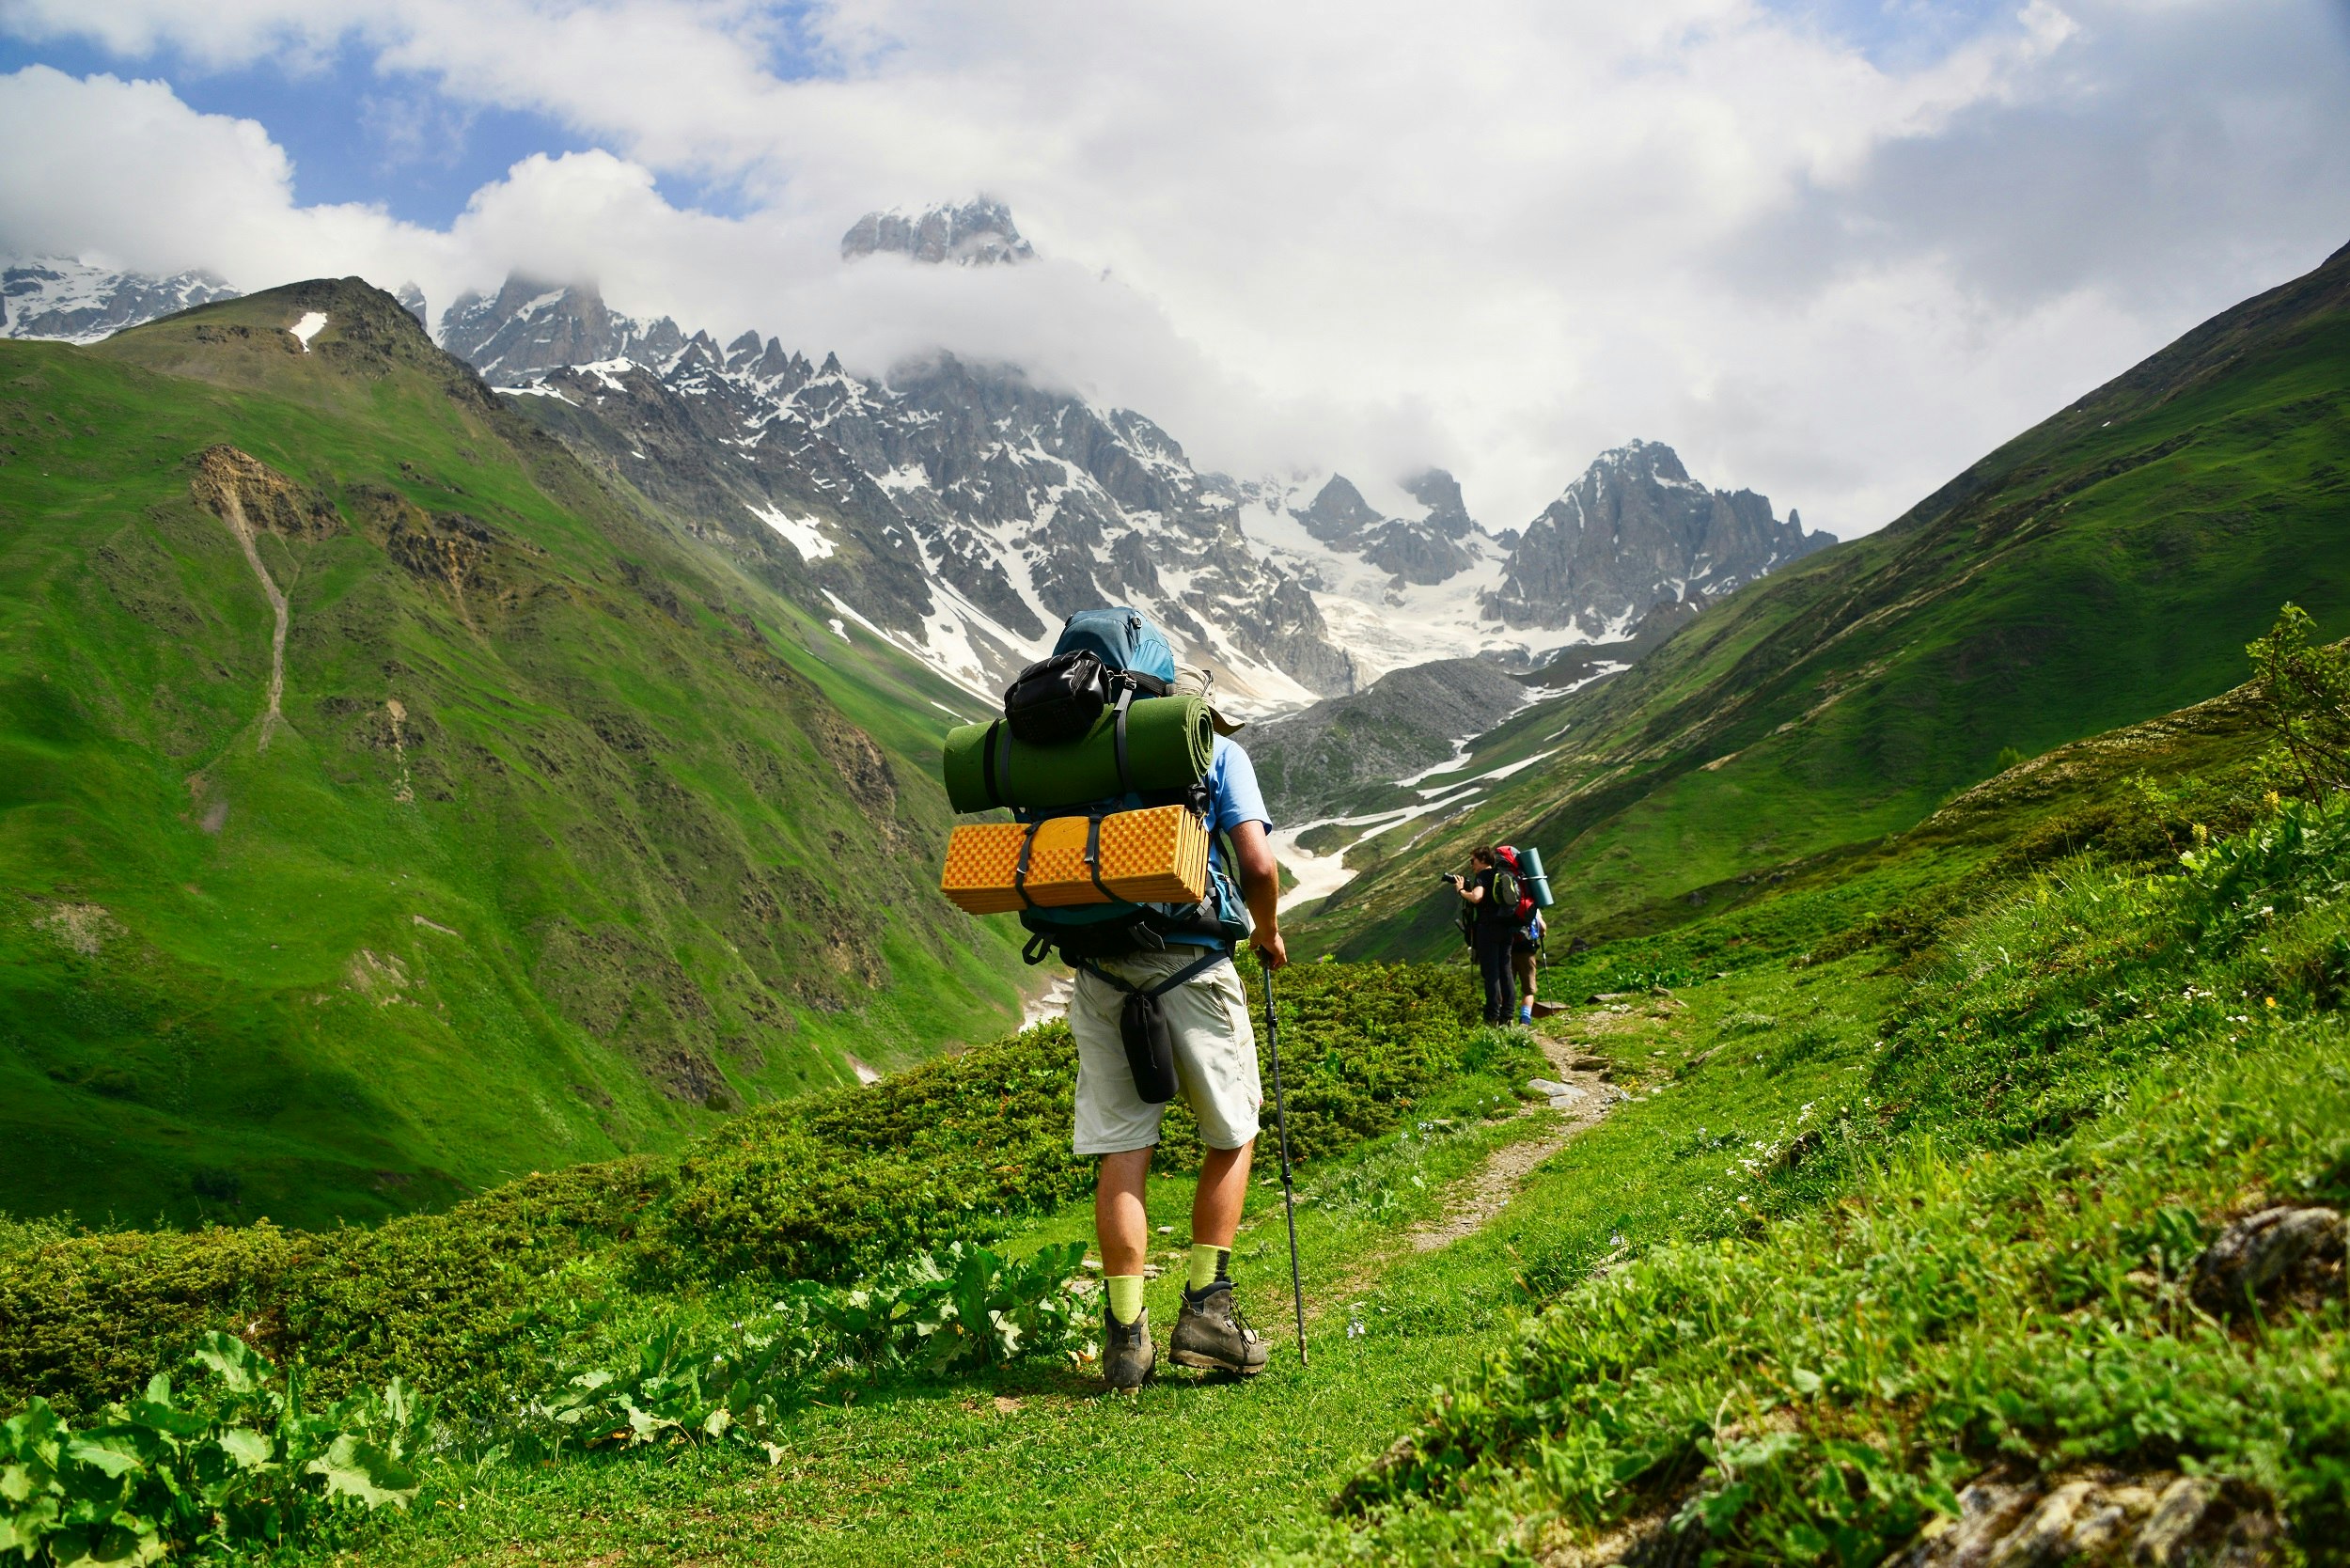 A few hikers wearing large backpacks with sleeping mats attached hike up a grassy trail towards a rocky, snow-covered summit in the distance.